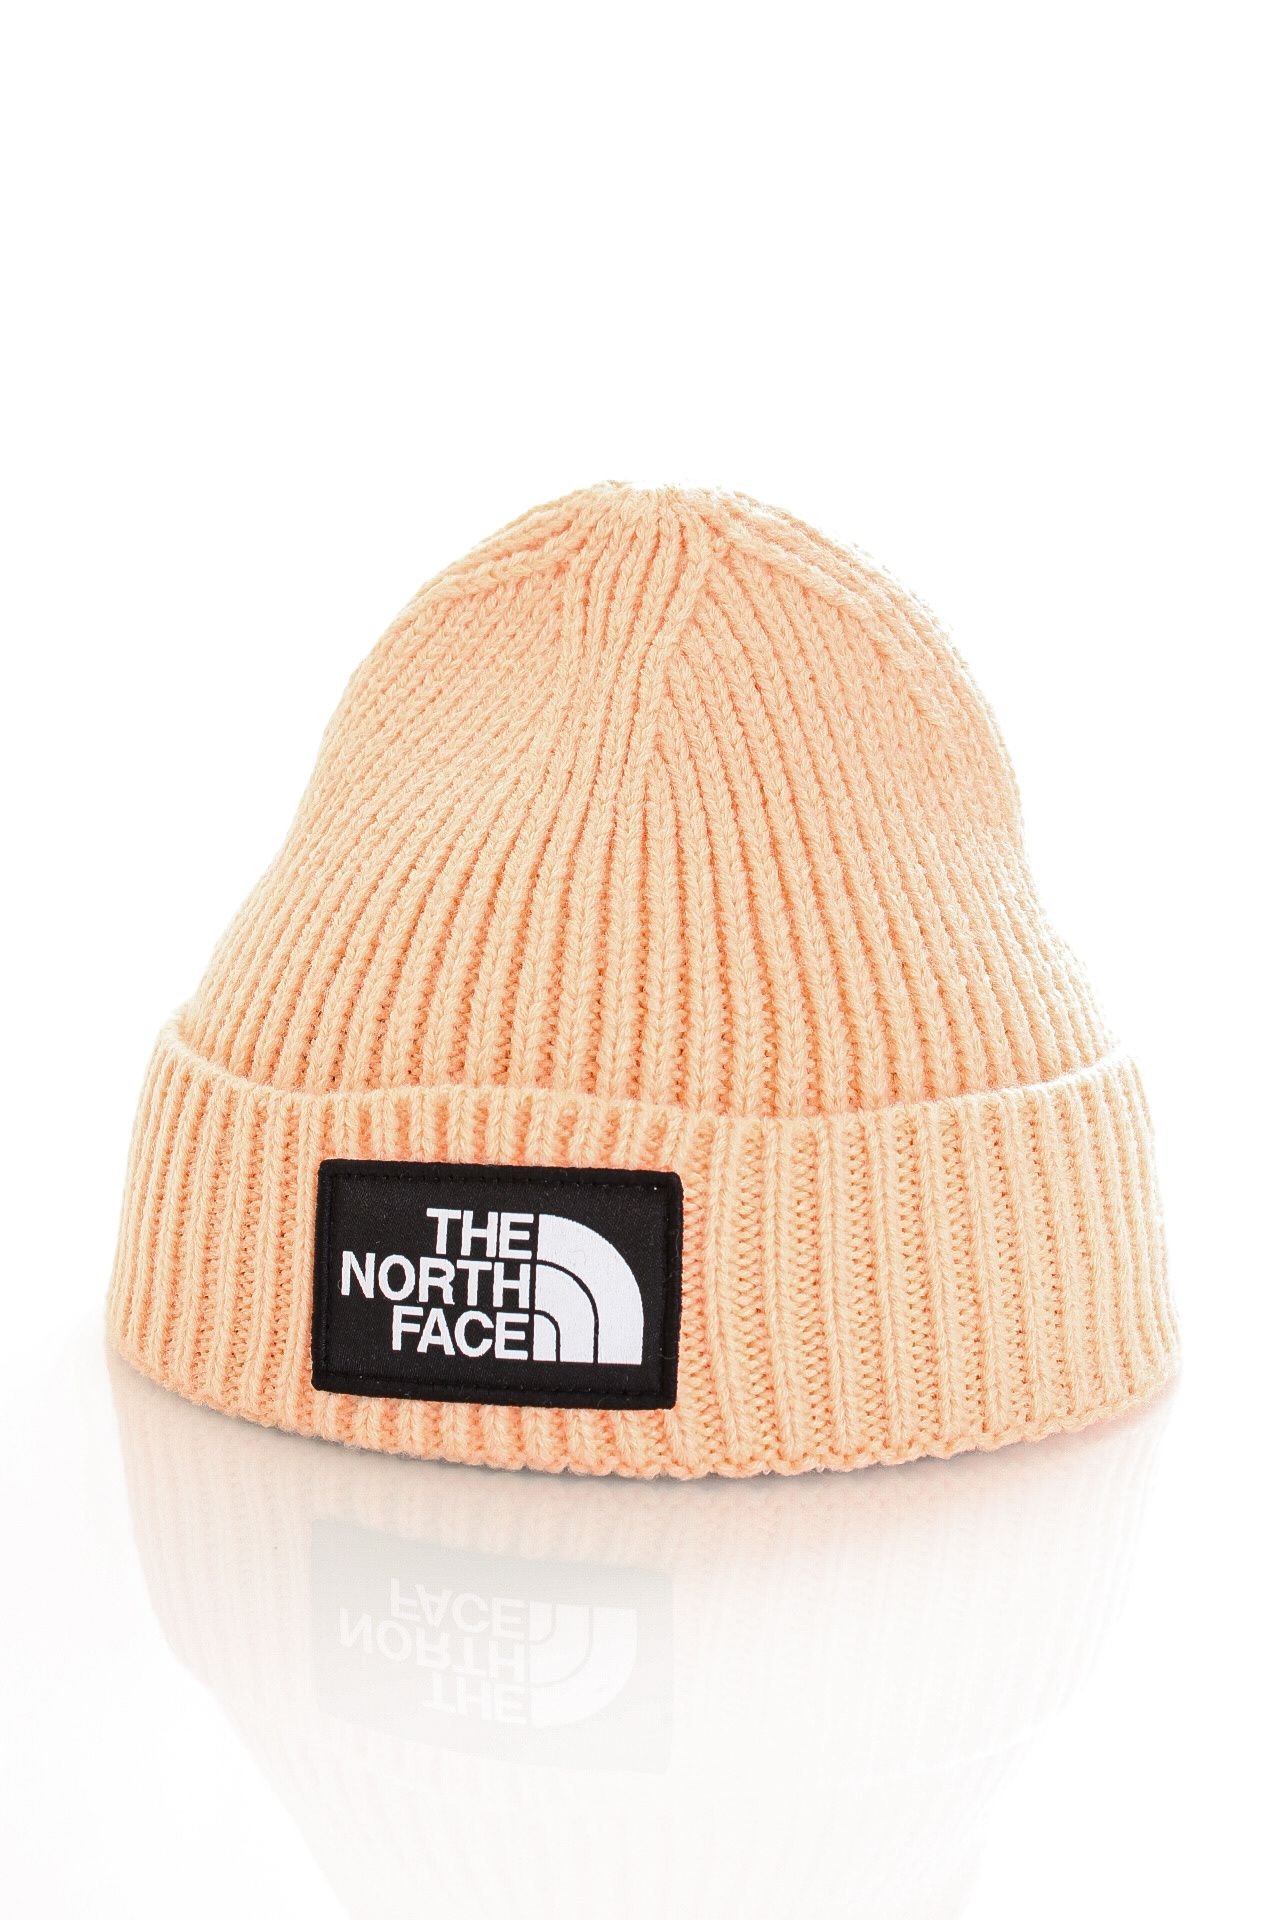 Afbeelding van The North Face Muts TNF LOGO BOX CUFFED SHT APRICOT ICE NF0A3FJX3R81